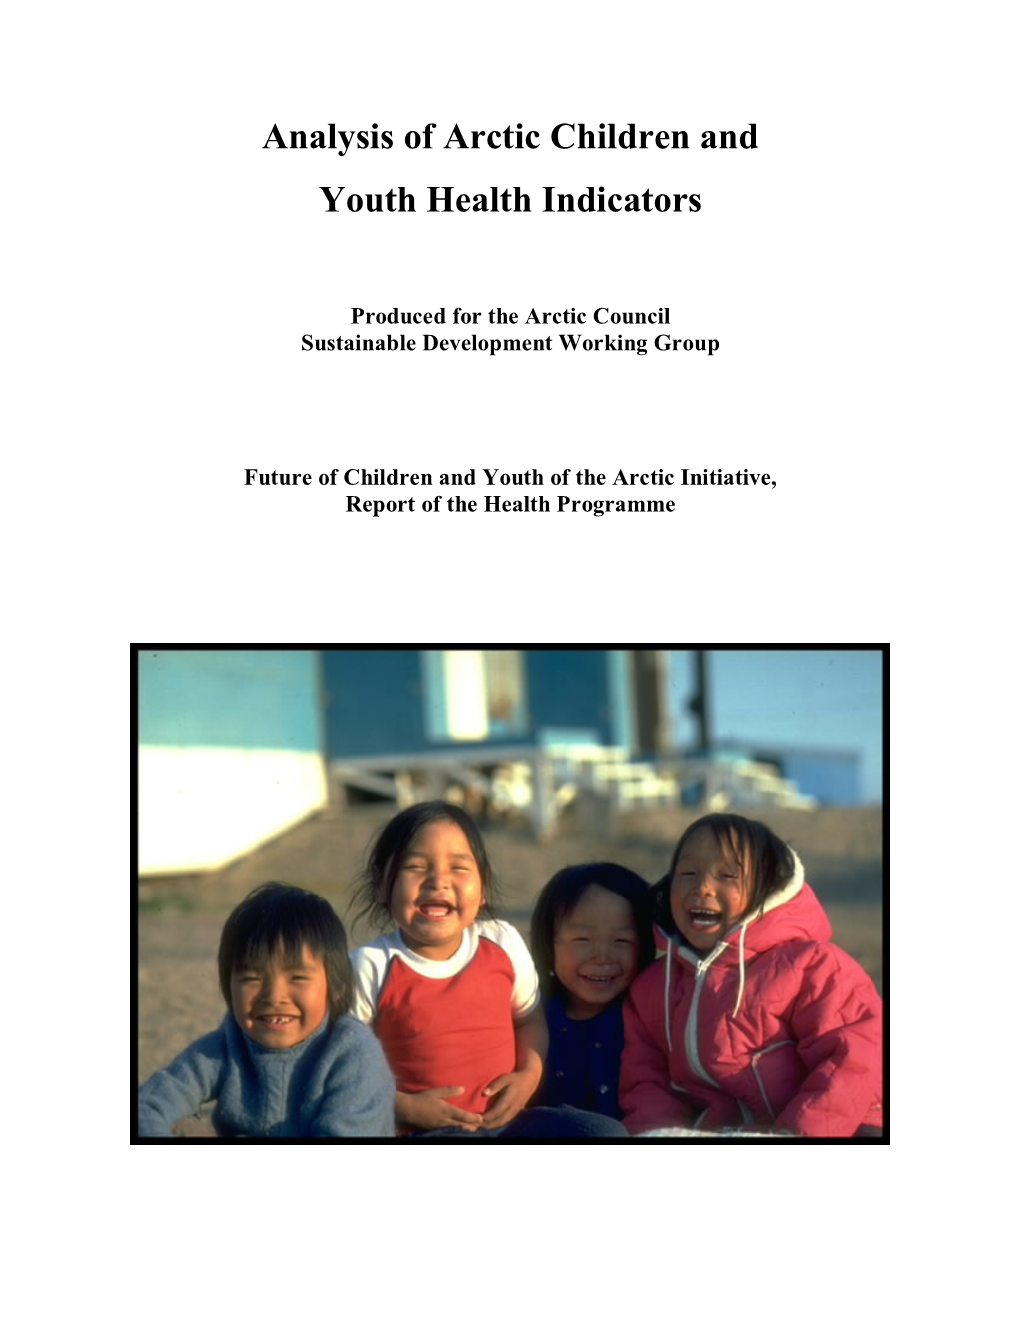 Analysis of Arctic Children and Youth Health Indicators.Pdf (866.2Kb)